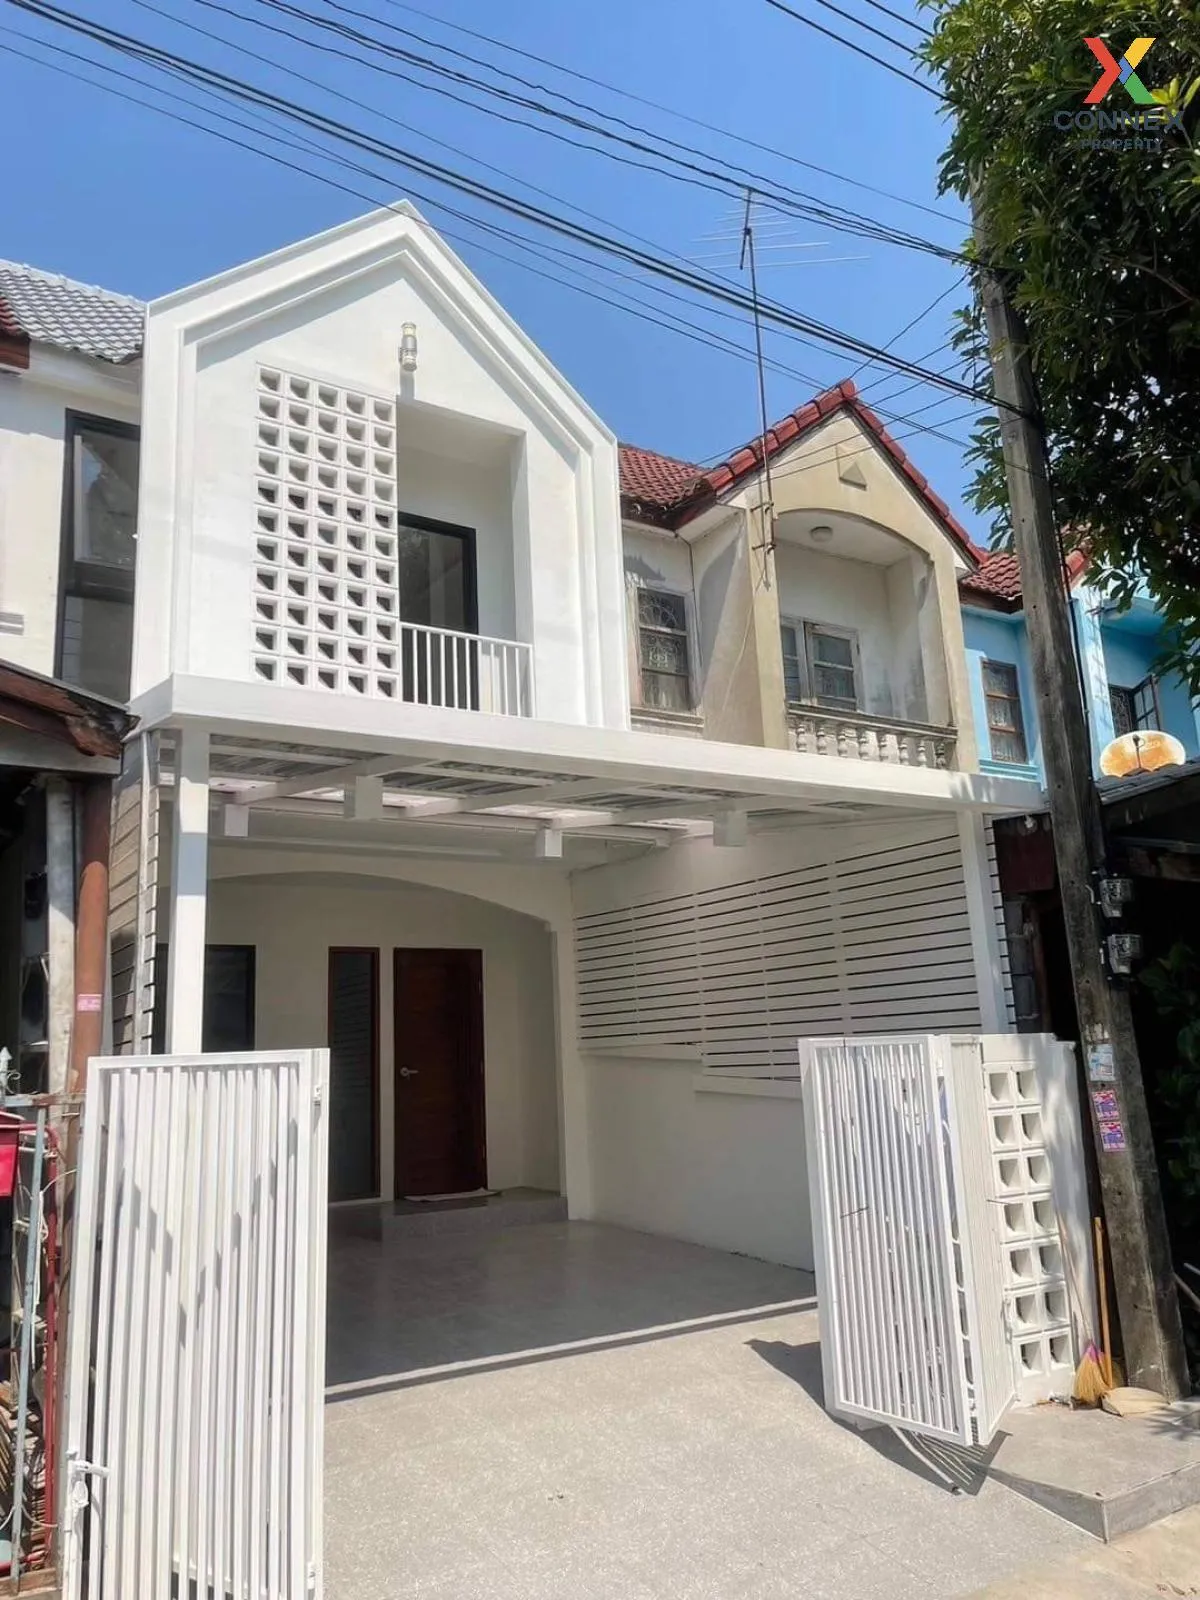 For Sale Townhouse/Townhome  , Sarinya Village , newly renovated , Khlong Song , khlong Luang , Pathum Thani , CX-96691